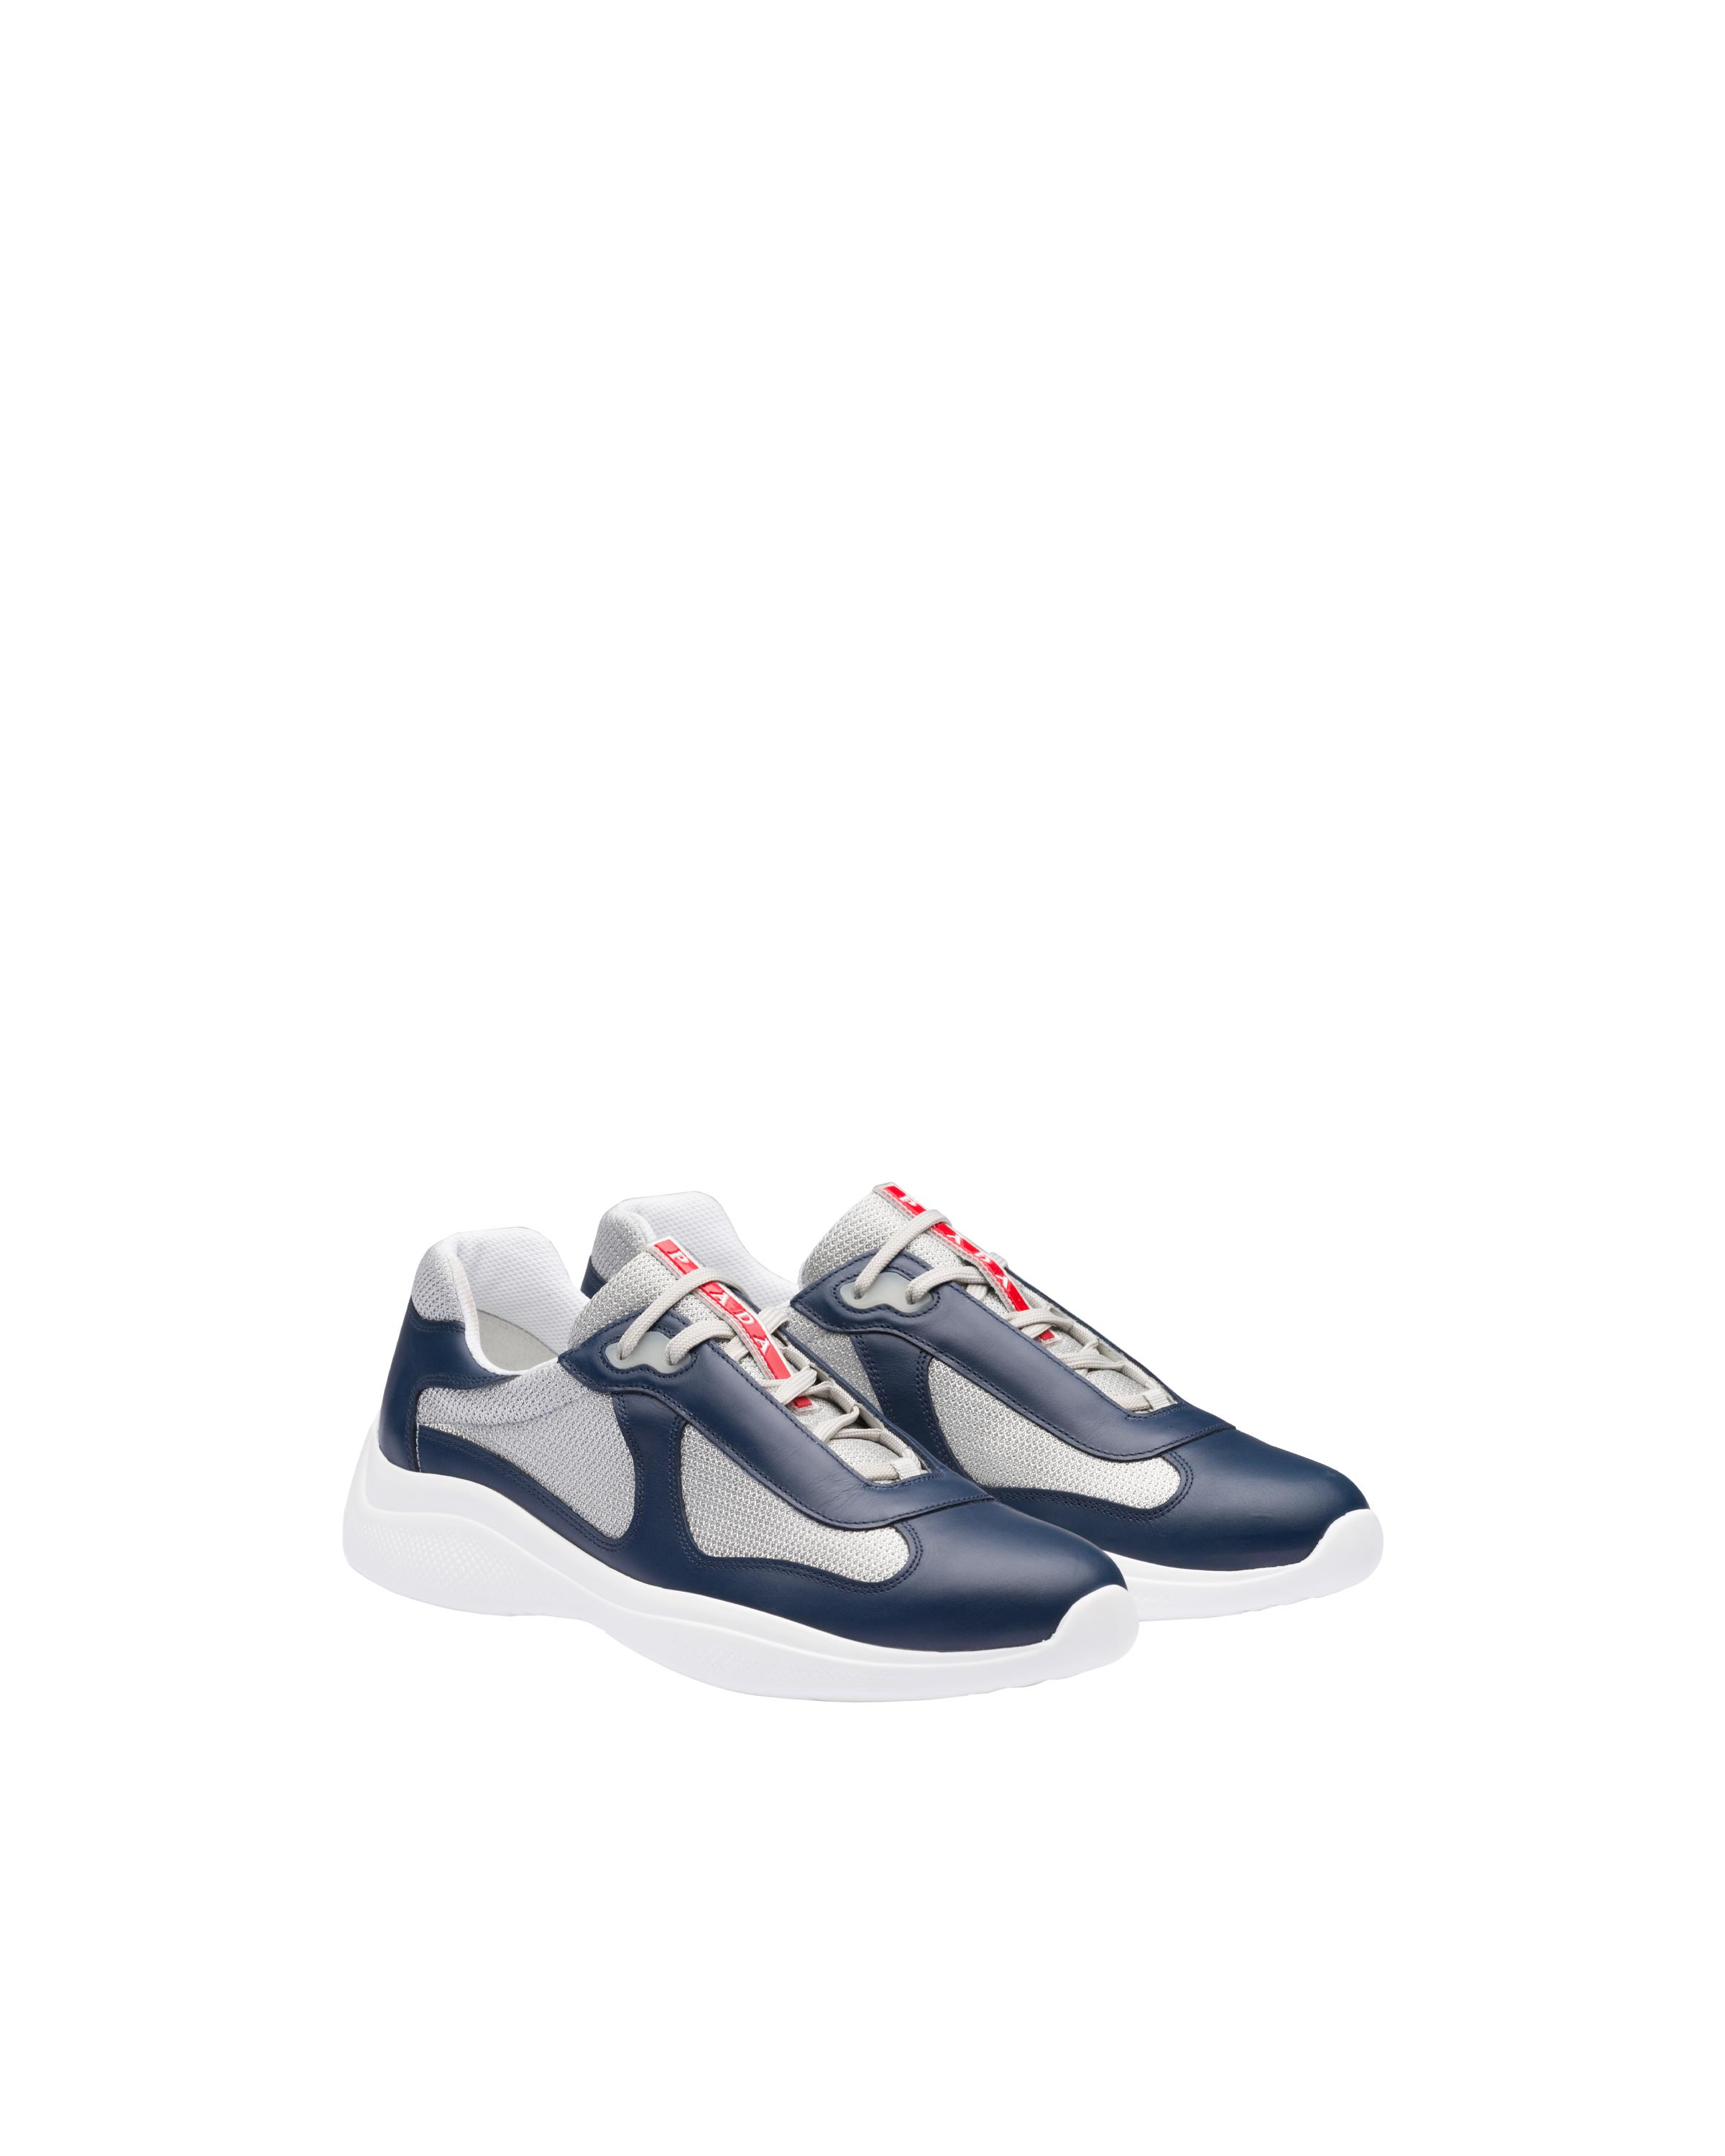 Prada New America's Cup Leather And Technical Fabric Sneakers in Blue ...